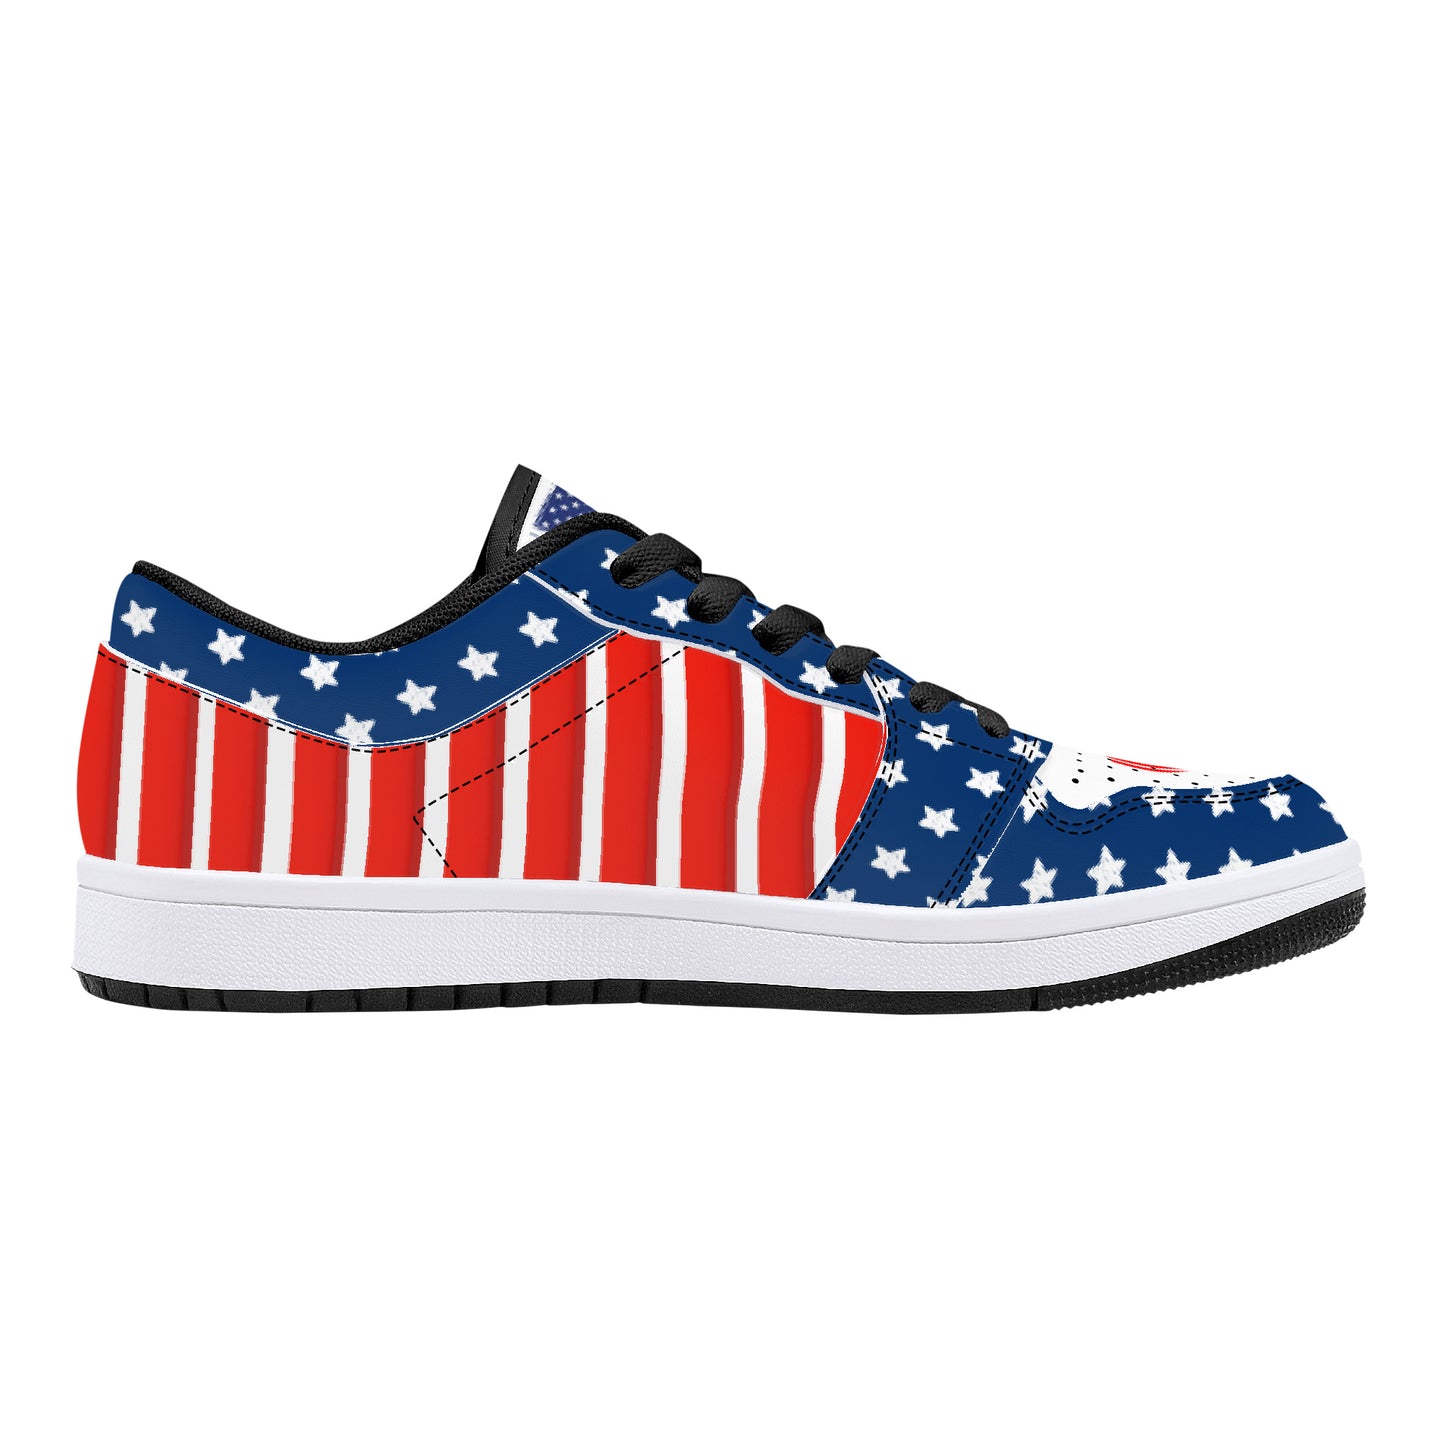 USA Leather Sneakers